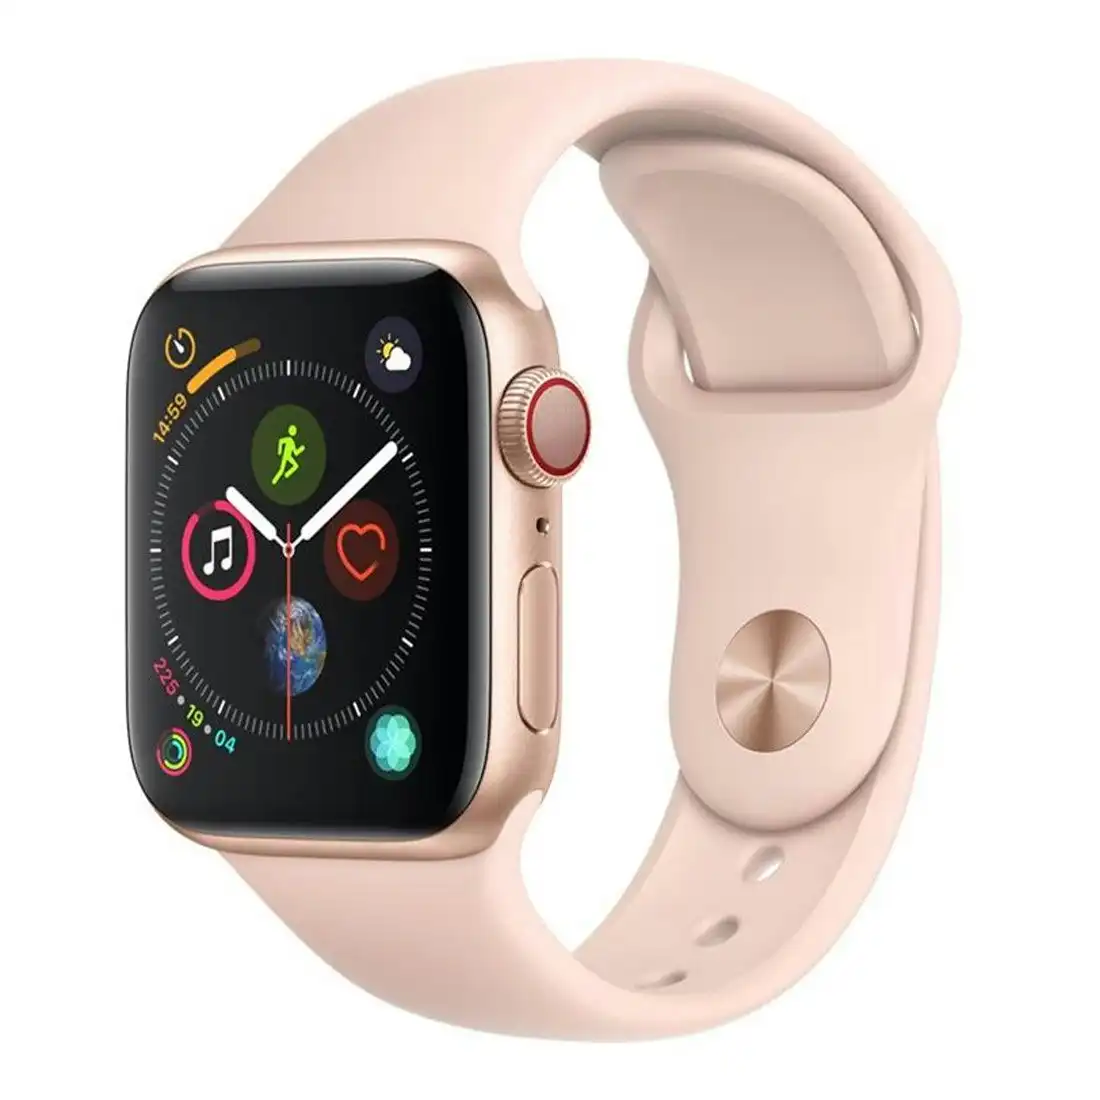 Apple Watch 44mm S4 (Cellular) - Gold Al Case w/ Pink Sand Sport Band [Refurbished] - As New